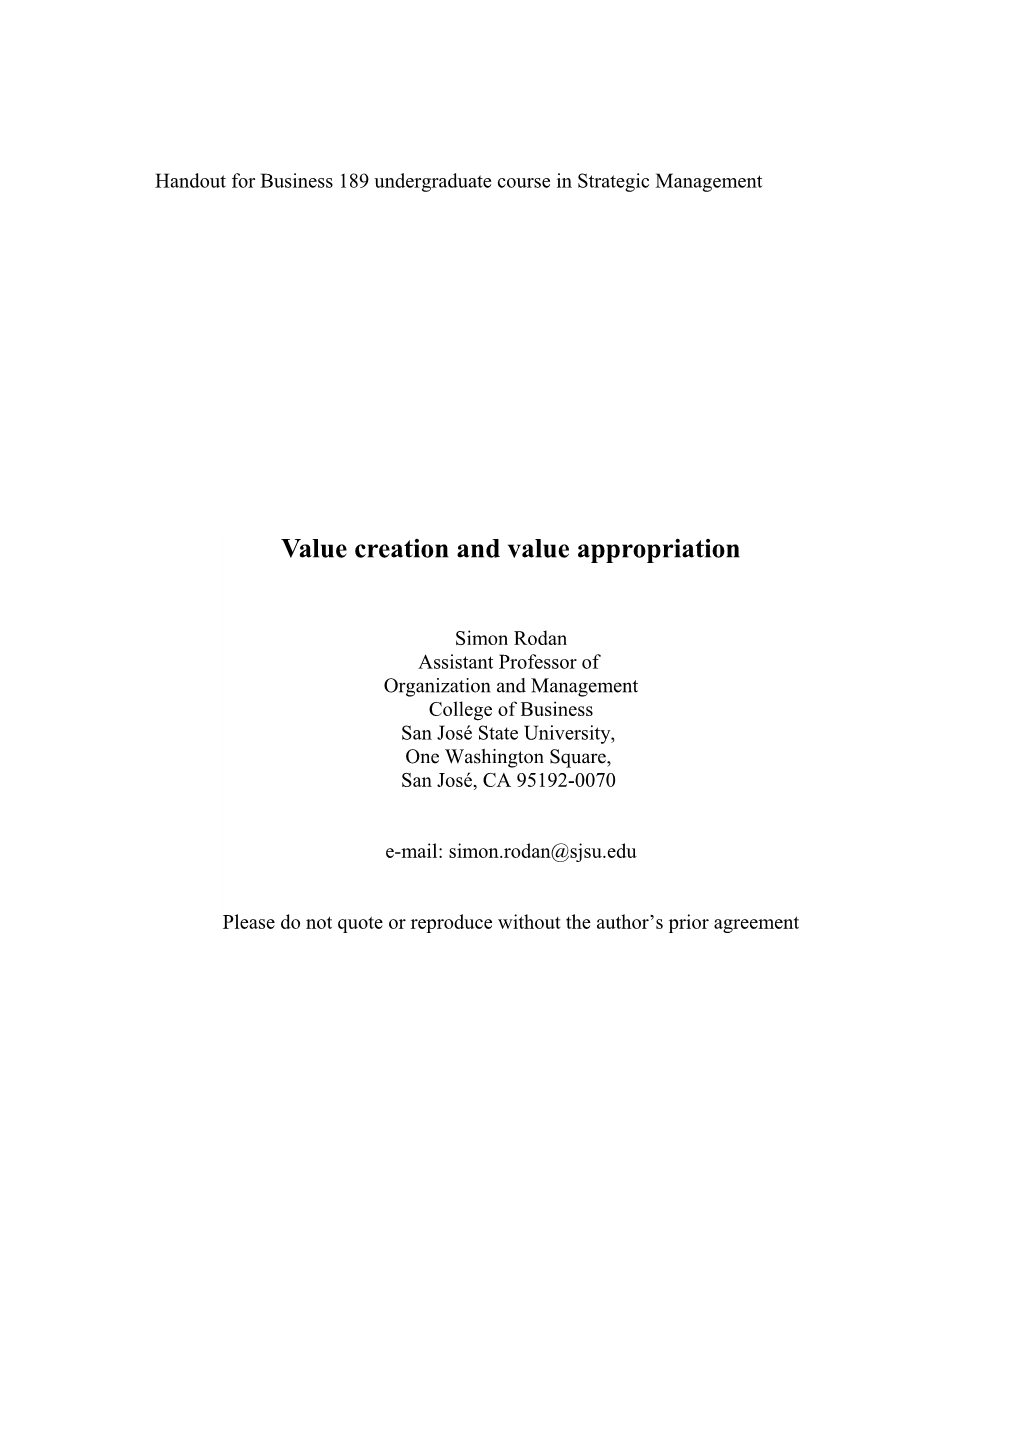 Value Creation and Value Appropriation